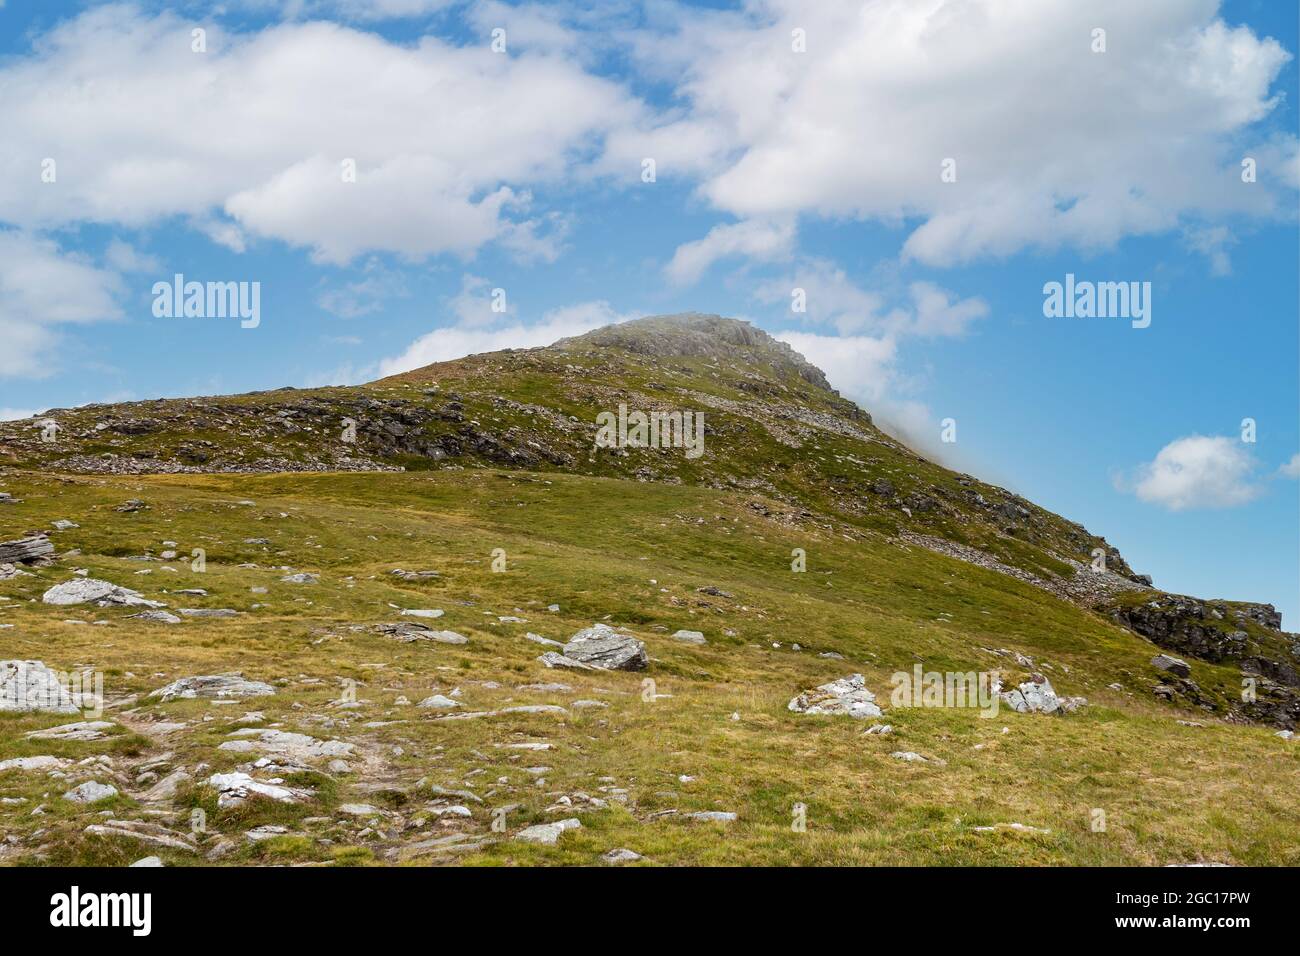 The Munro mountain of Beinn Dubhchraig near Tyndrum, near Stirling, Scotland, which sits in the Loch Lomond and Trossachs National Park Stock Photo